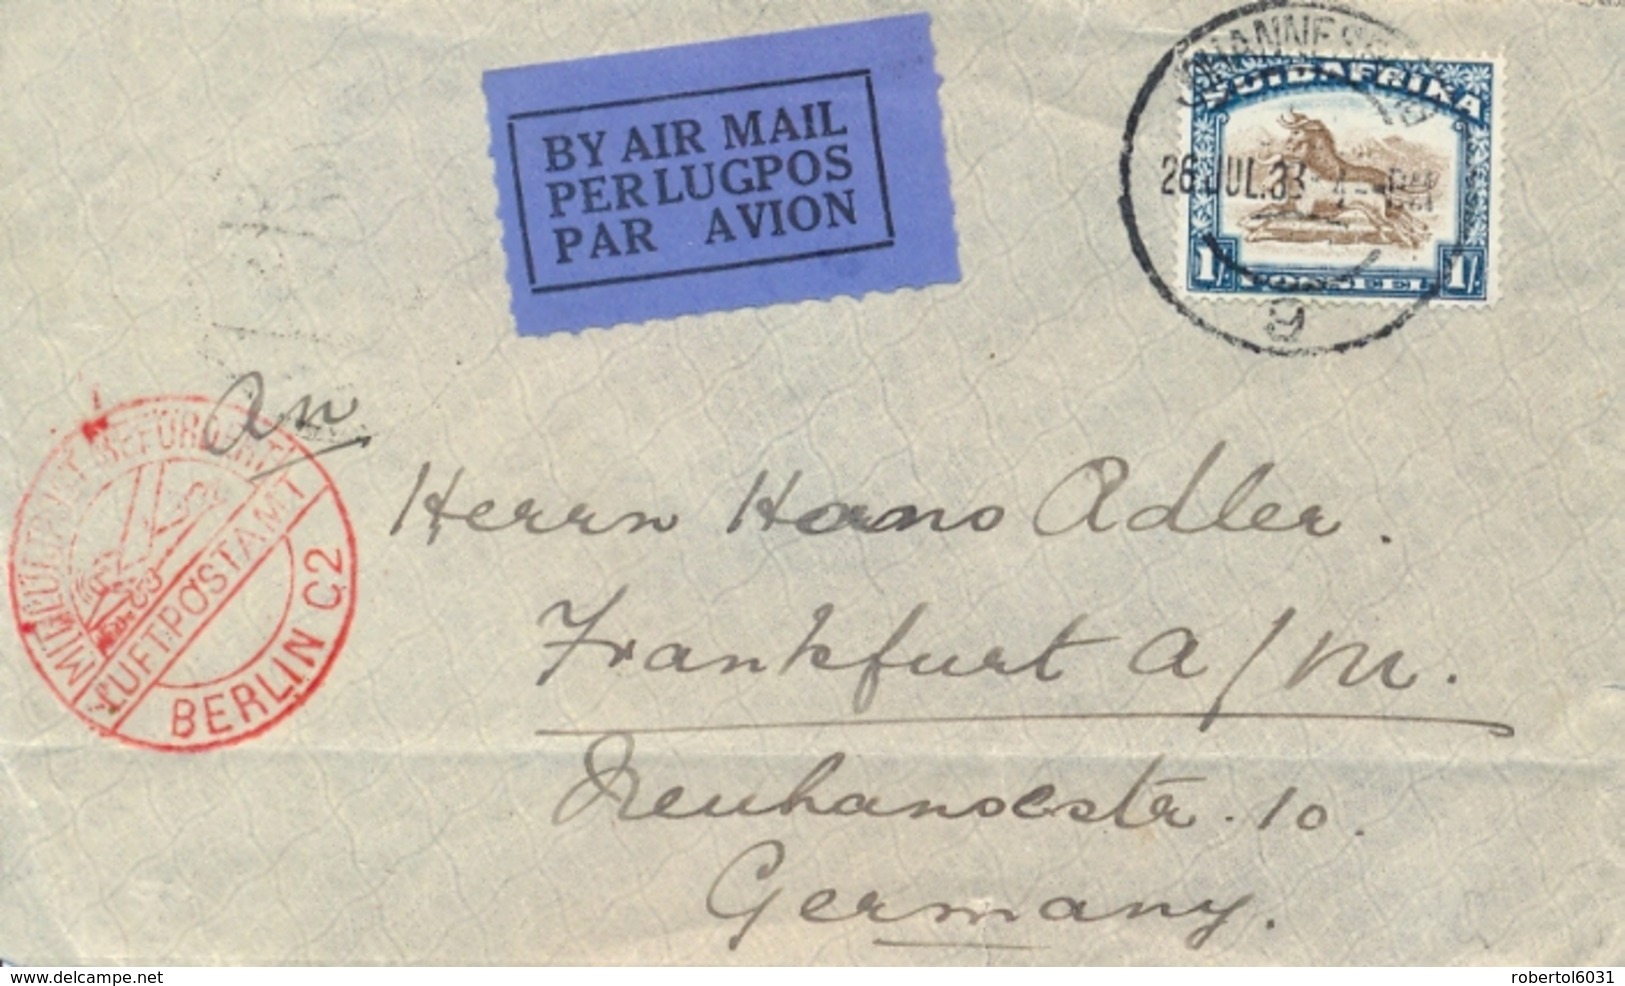 South Africa 1933 Cover By Airmail To Germany With Arrival Red Handstamp Luftpostamt Berlin C2 - Posta Aerea